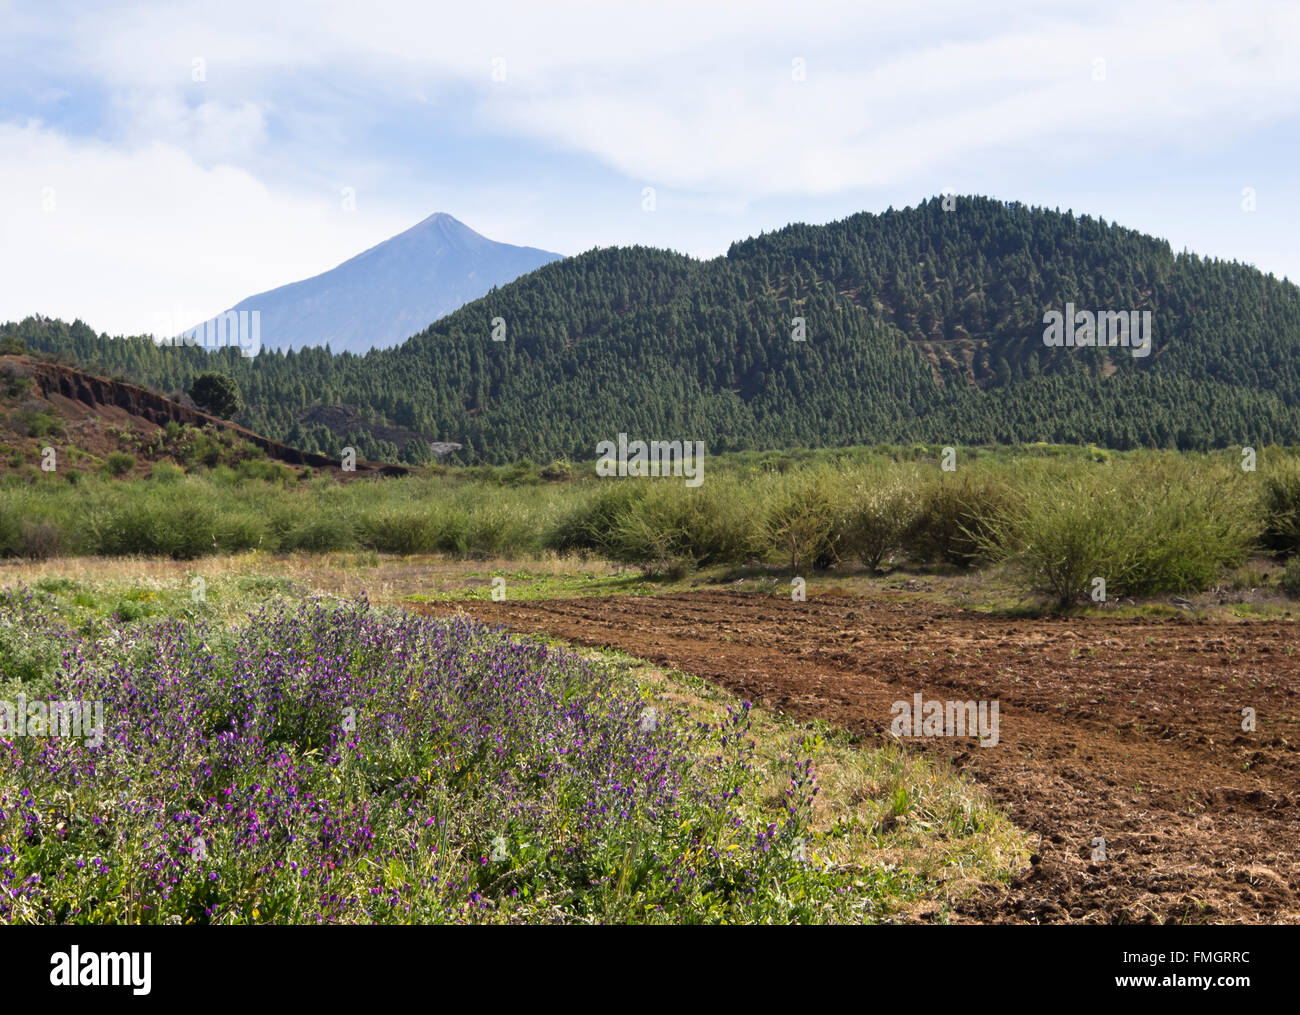 Wildflowers in a field in front of a pine forest, Mount Teide in the distance, panorama from a hiking trip near Erjos, Tenerife Stock Photo